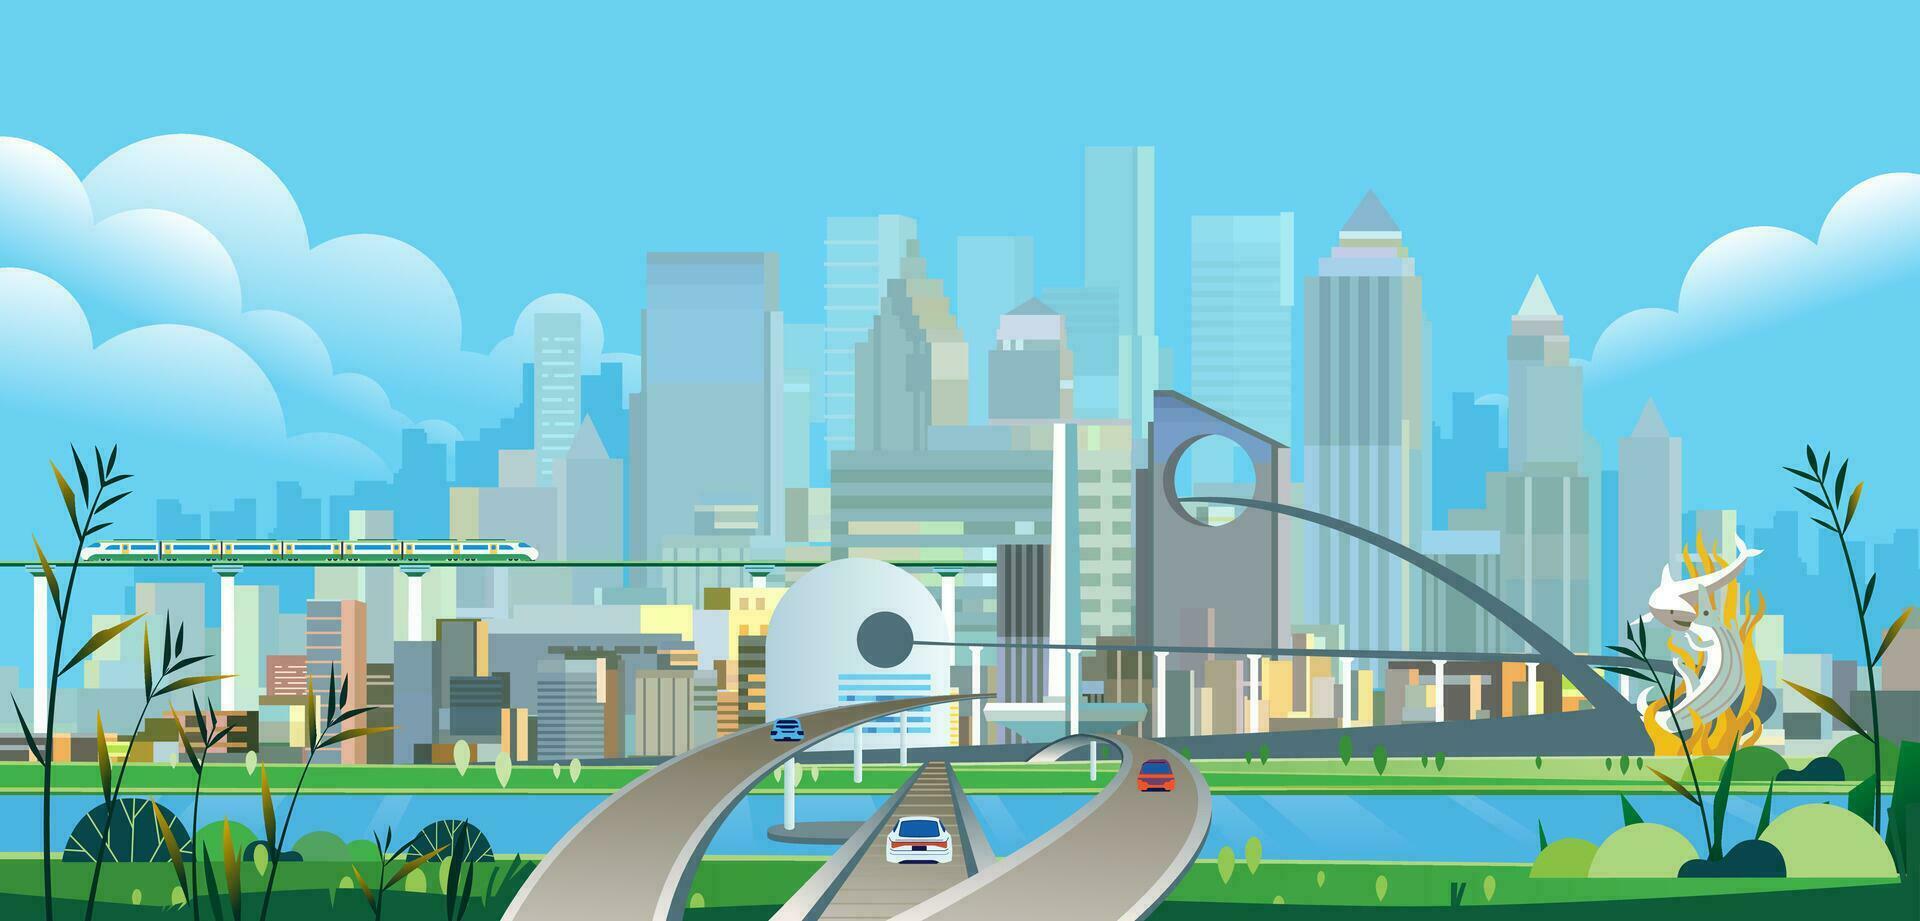 Future sustainability city futuristic Modern architecture towers and skyscrapers and green plants along empty road green smart city landscape illustration vector